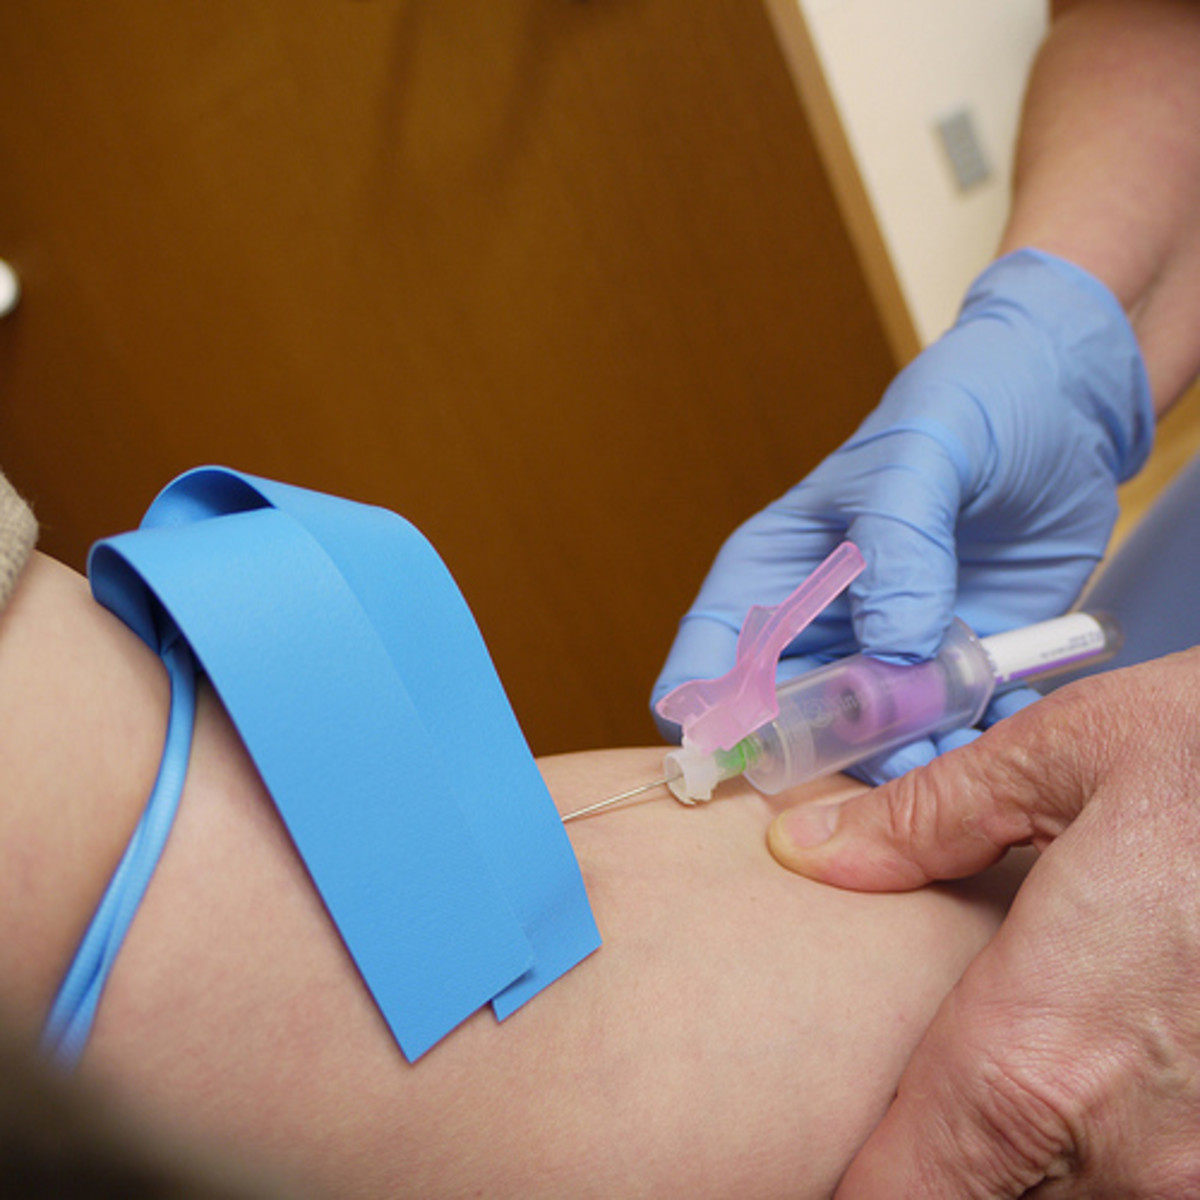 A good phlebotomy training program will give you a lot of practice in blood draw. 